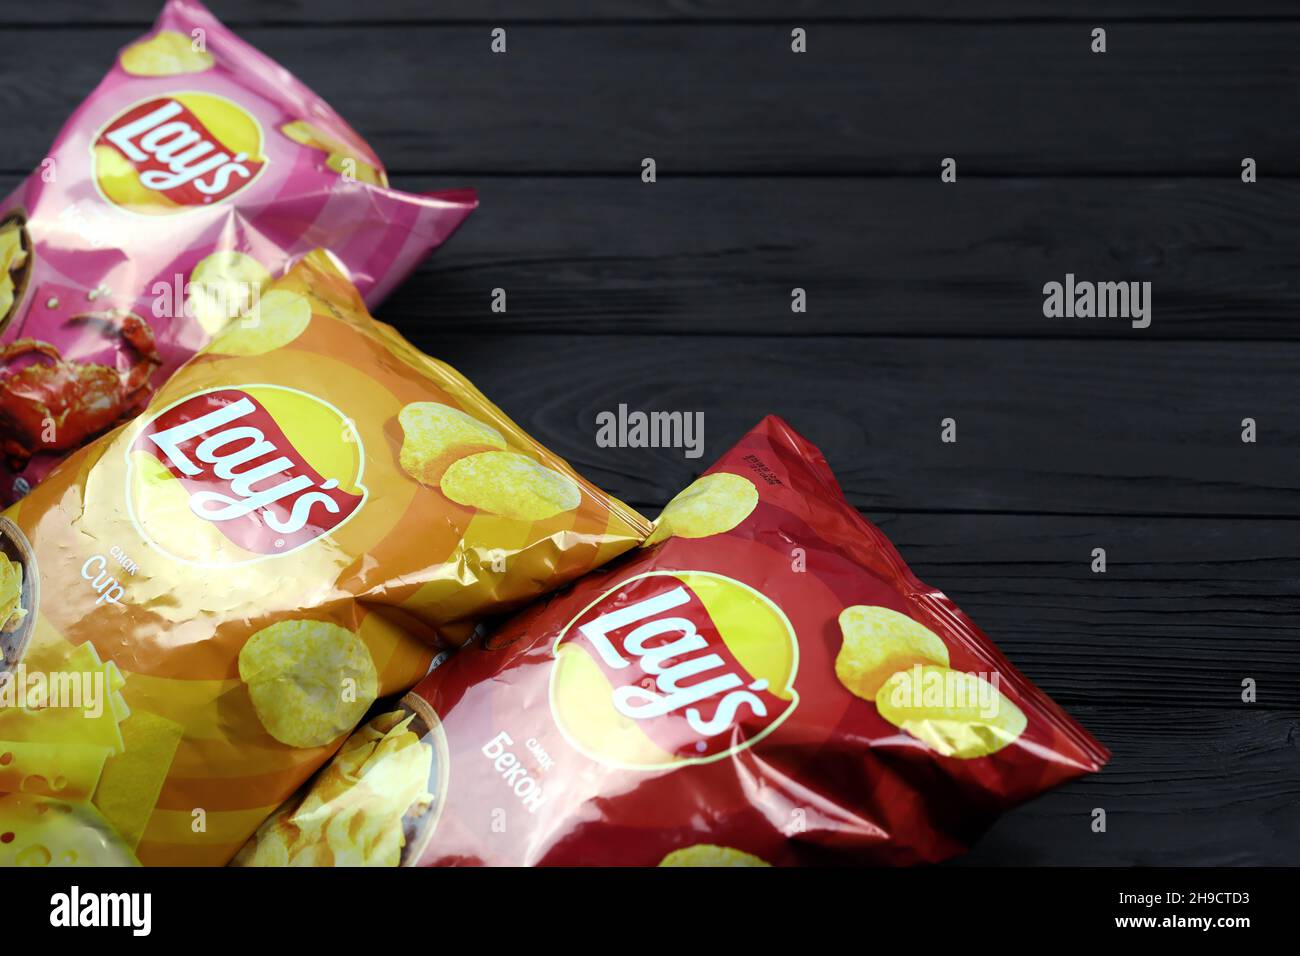 KHARKOV, UKRAINE - JANUARY 3, 2021: Various flavoured of lay's potato chips on wooden background. Lay's has been owned by PepsiCo through Frito-Lay si Stock Photo